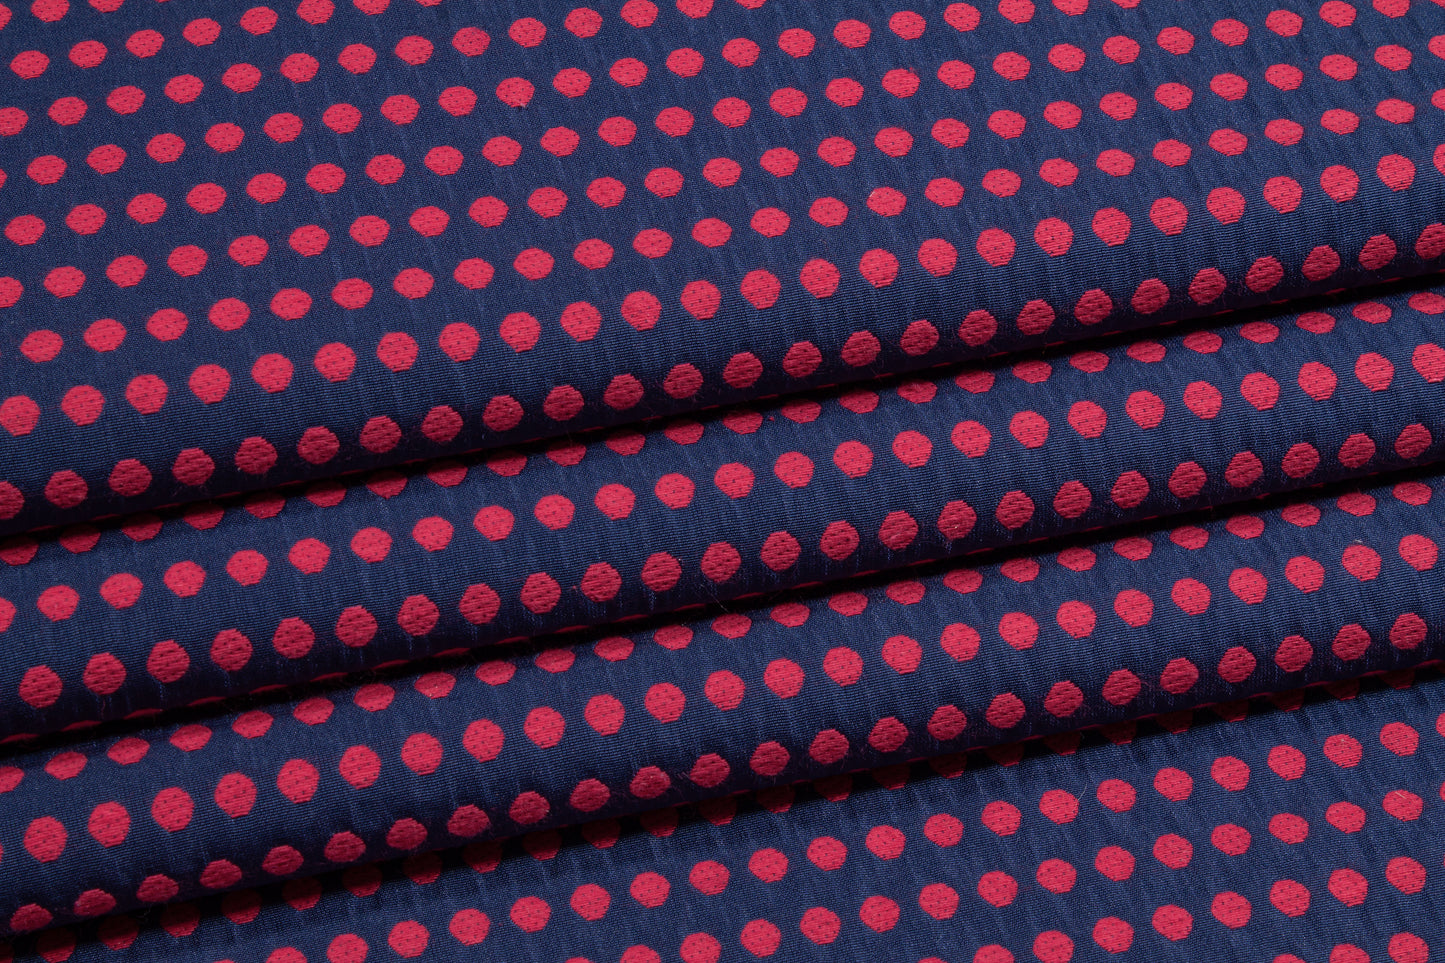 Dotted Brocade - Raspberry Red and Navy Blue